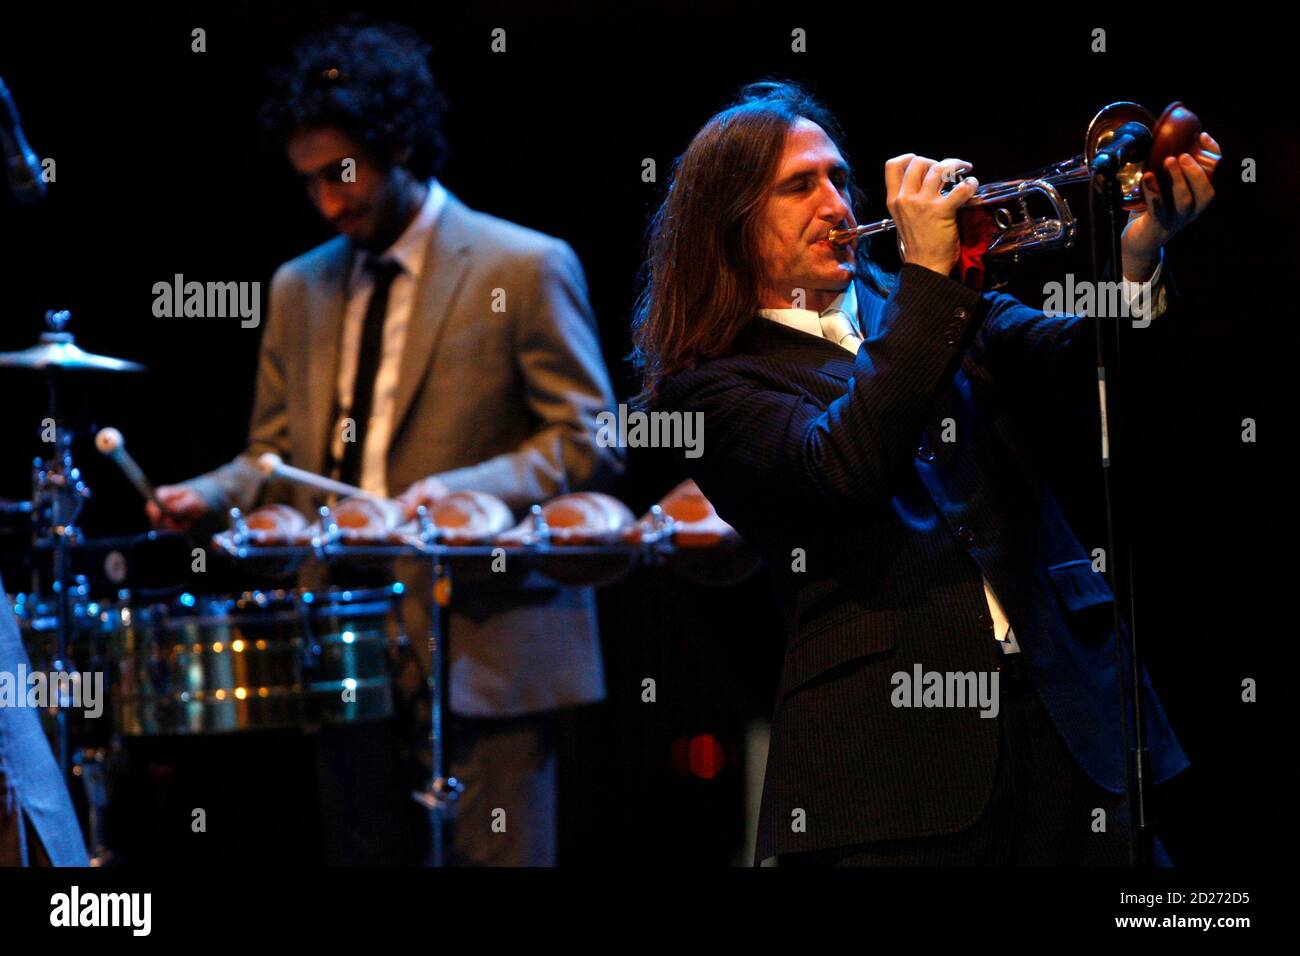 Gavin Bondy (R) of the U.S. band "Pink Martini" performs during the Jordan  Festival at the